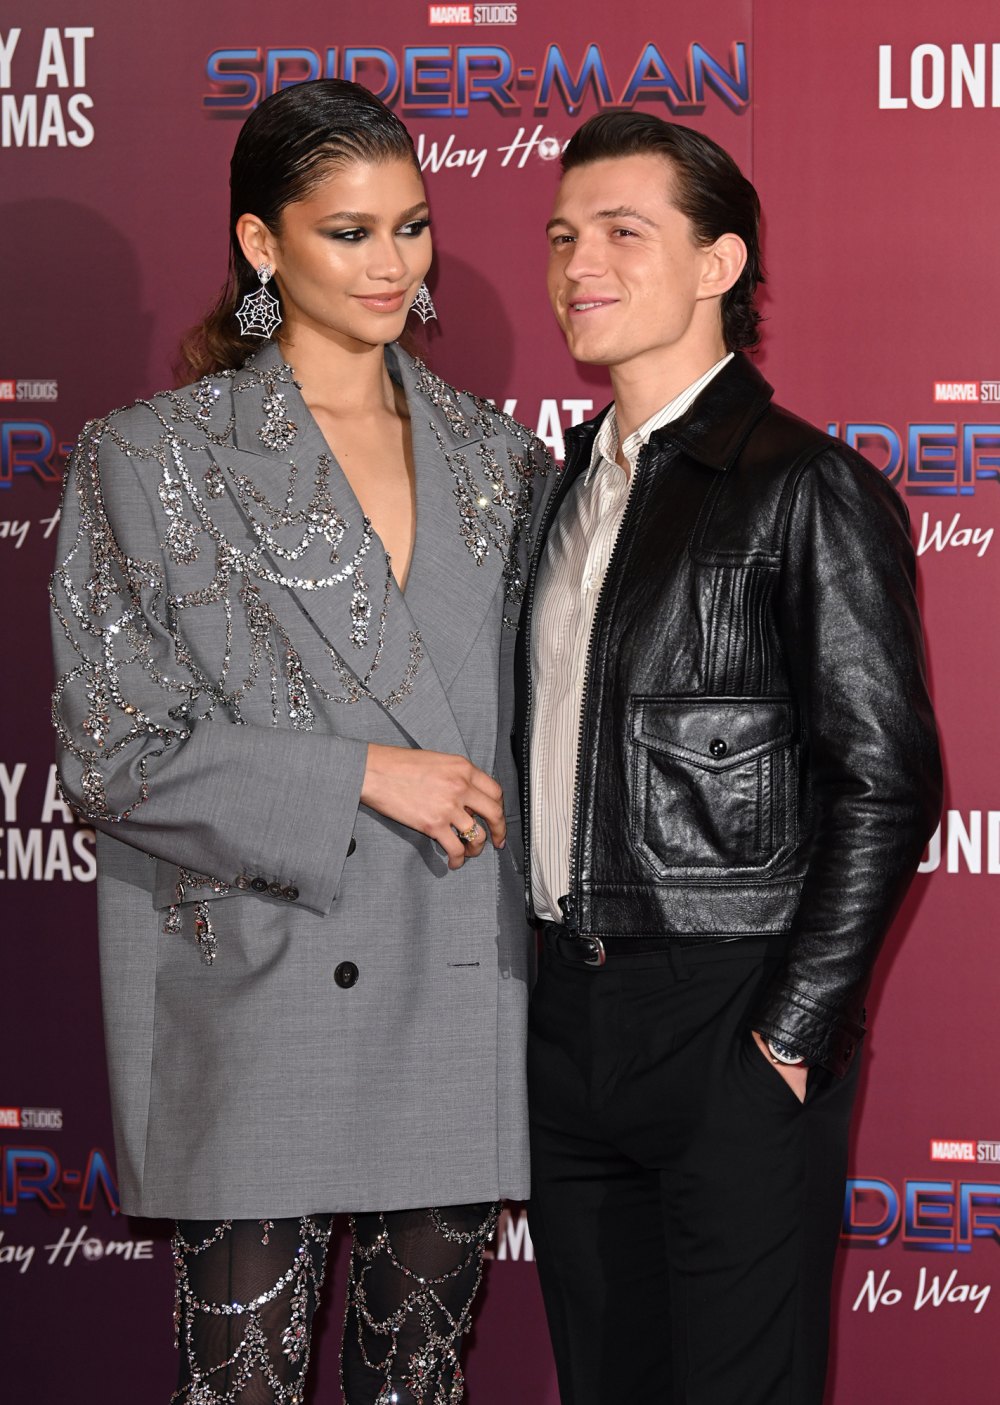 Tom Holland and Zendaya Rewatch Spider-Man to Relive Their Youth